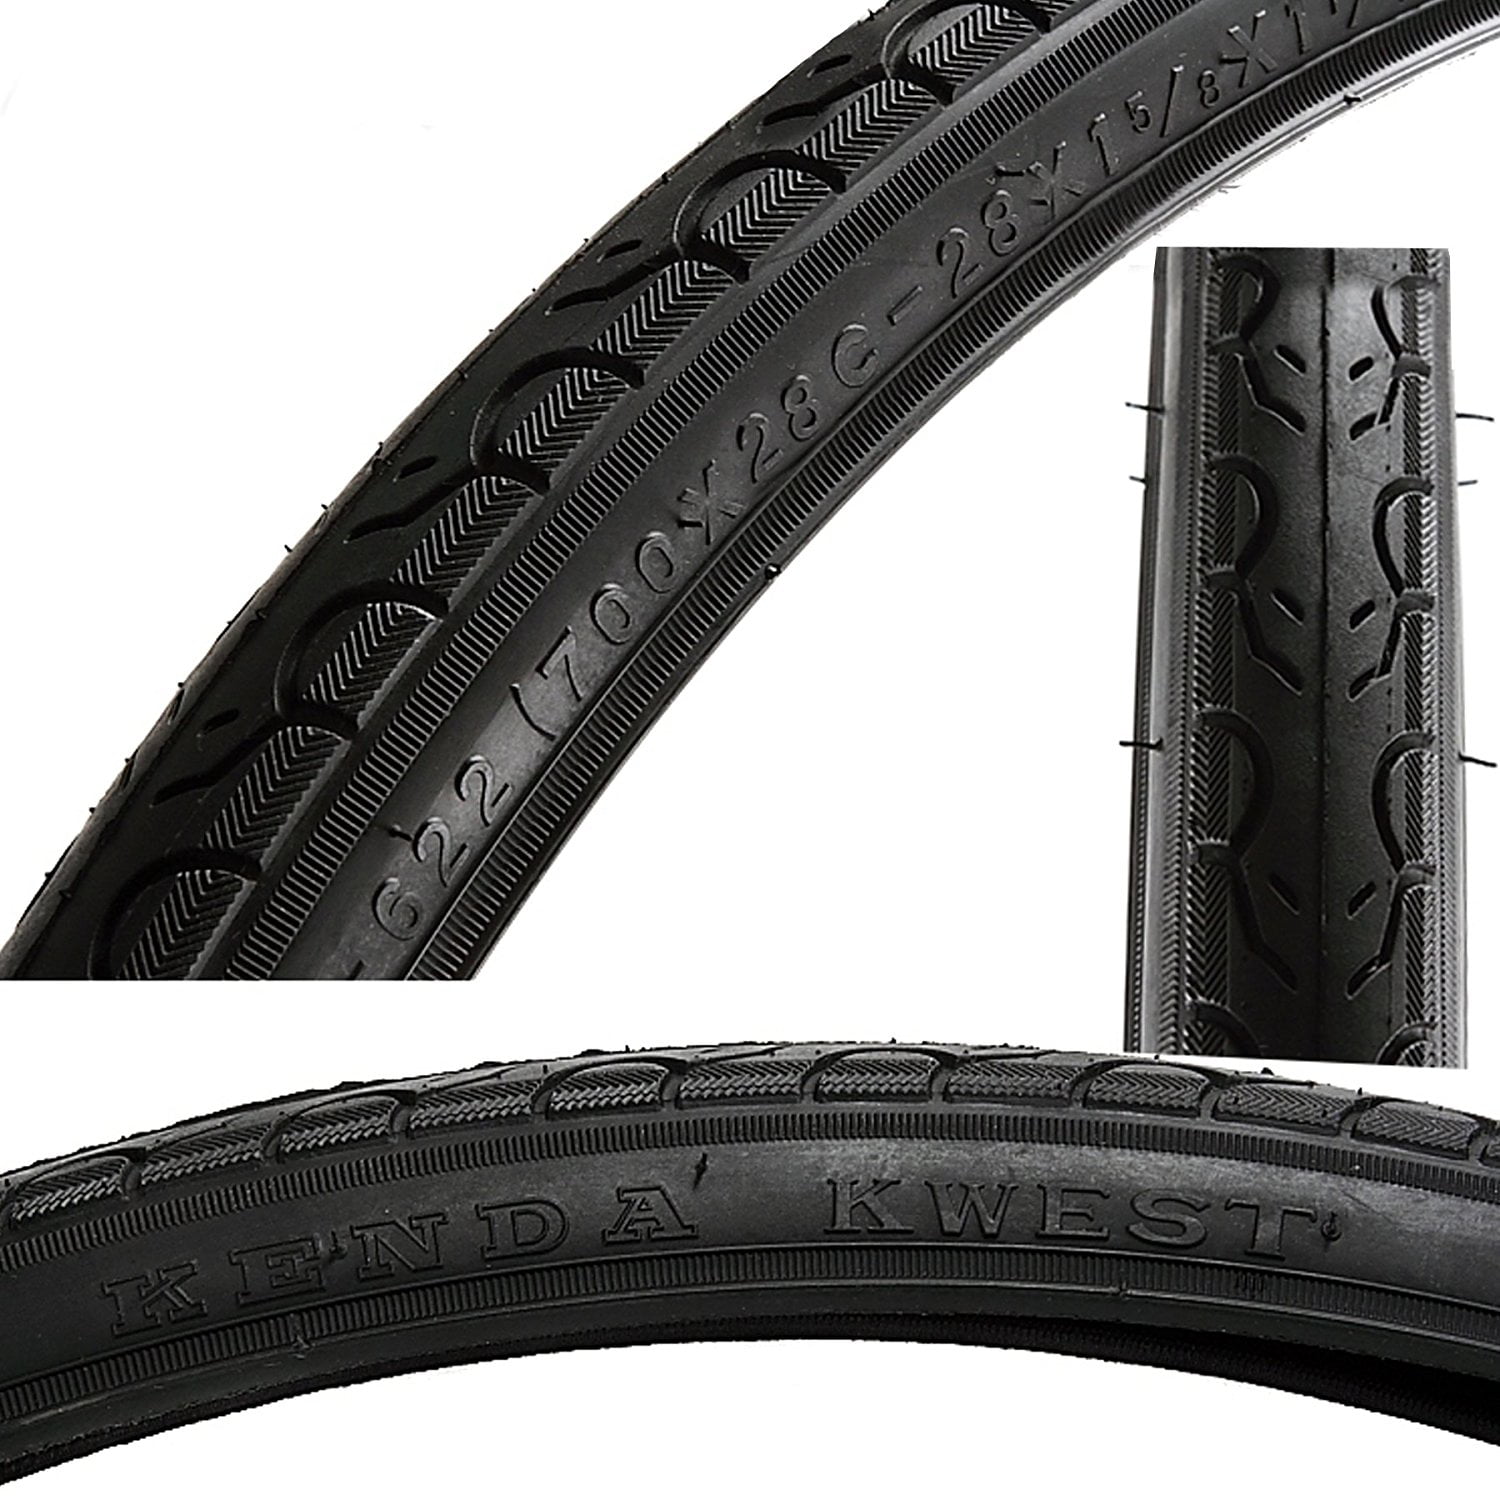 Profex 60020 Road Bicycle Tyres 28 x 1.75 Inches 28 x 1 5/8 x 1 3/4 Inches Black/White